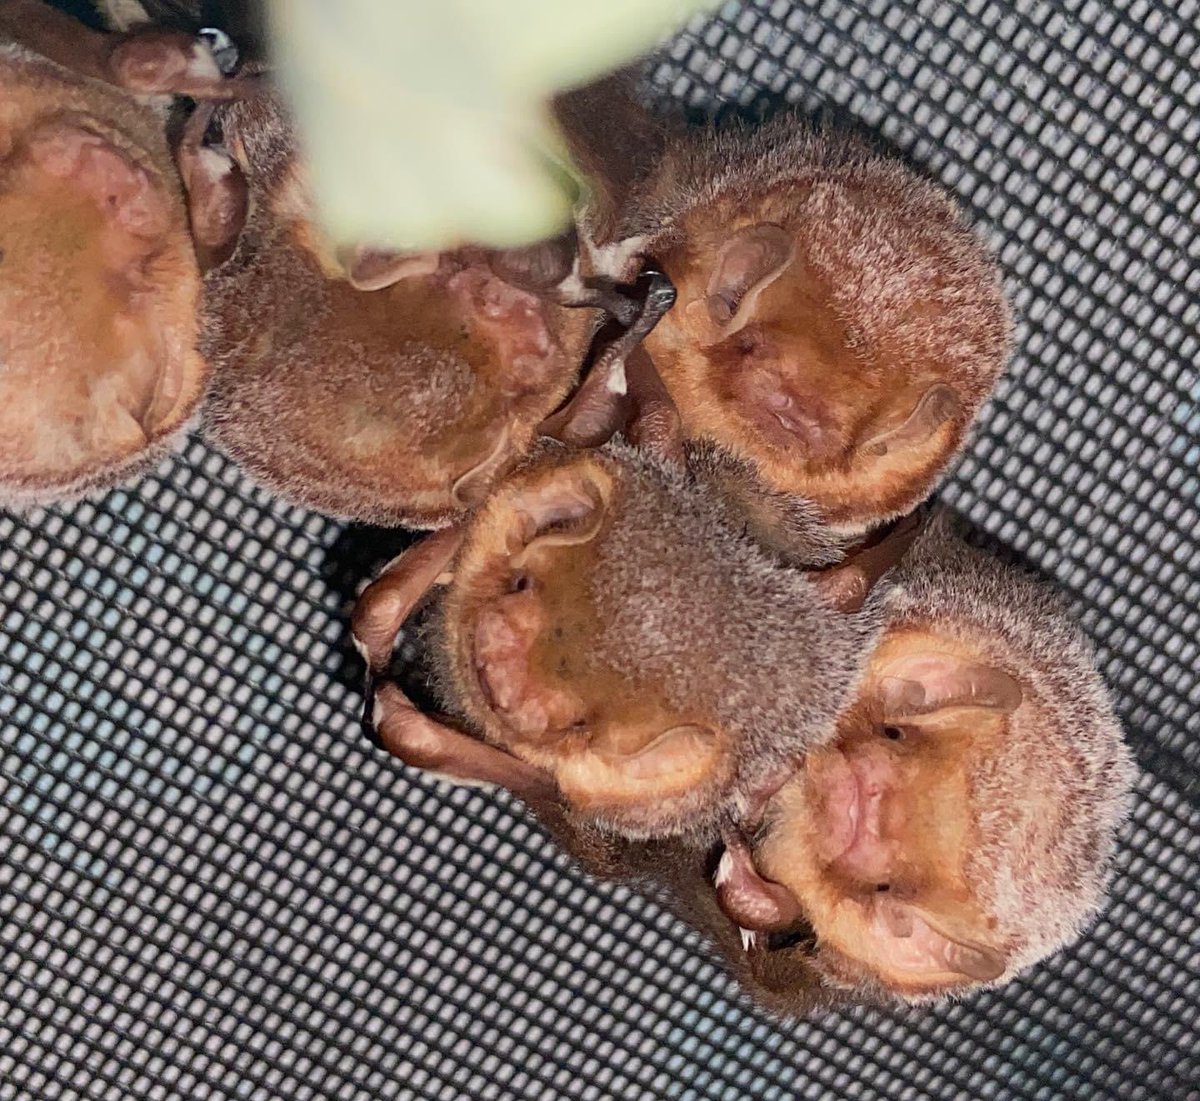 We are sure going to miss these little orange nuggets but they are ready to venture into the world. Until then we are going to soak up all the floofs before they leave ❤️

#pabatrescue #savepabats #lasiurusborealis #easternredbat